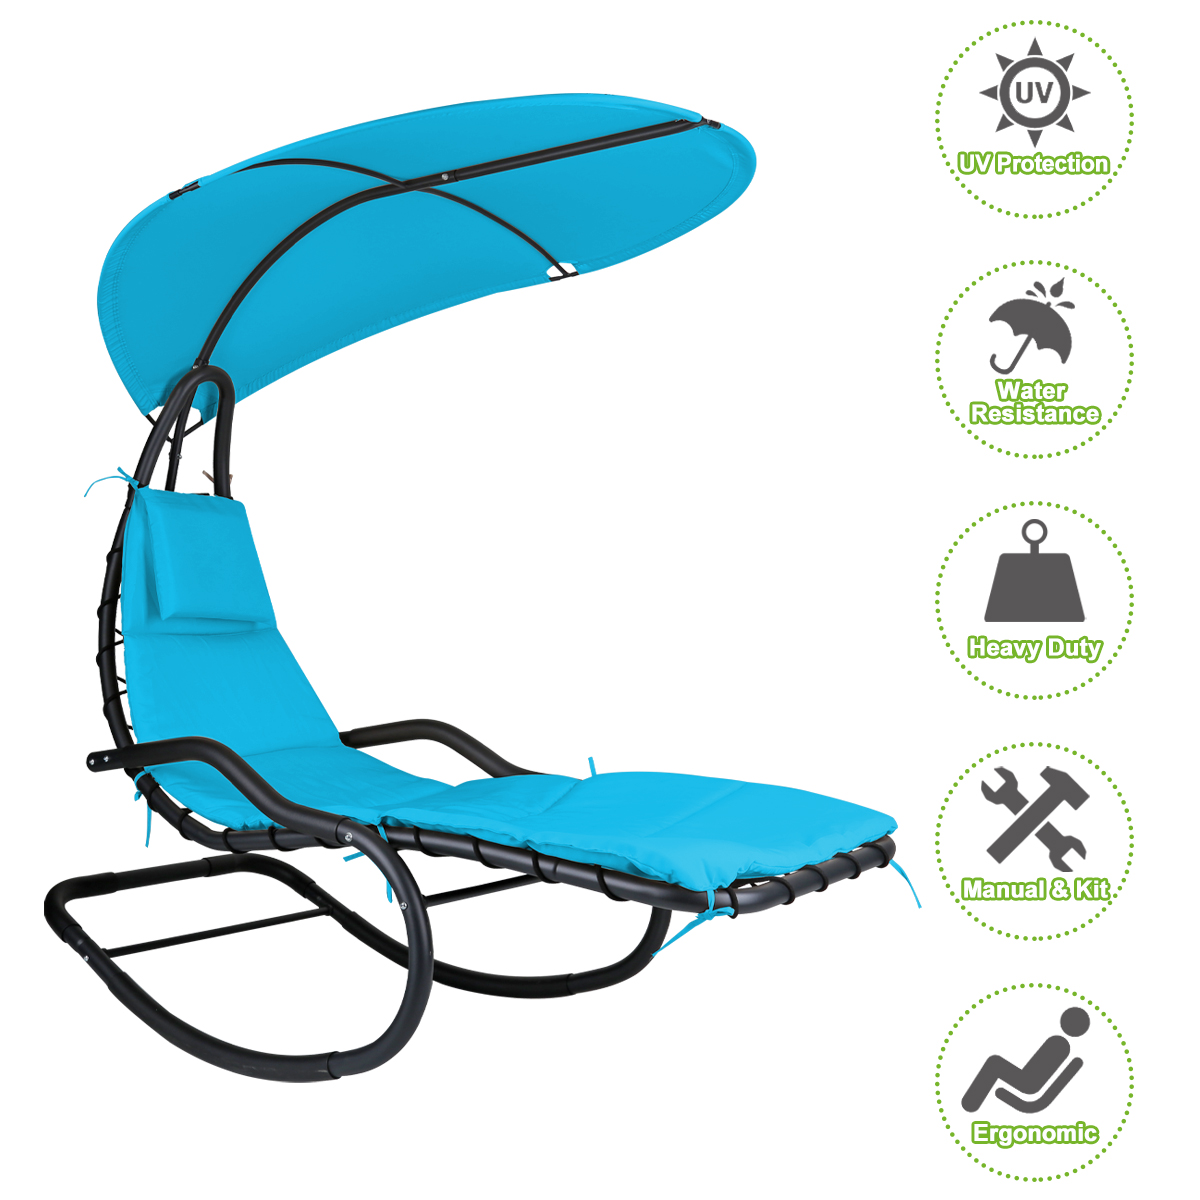 Rocking Hanging Lounge Chair - Curved Chaise Rocking Lounge Chair Swing For Backyard Patio w/ Built-in Pillow Removable Canopy with stand {Blue} - image 5 of 8